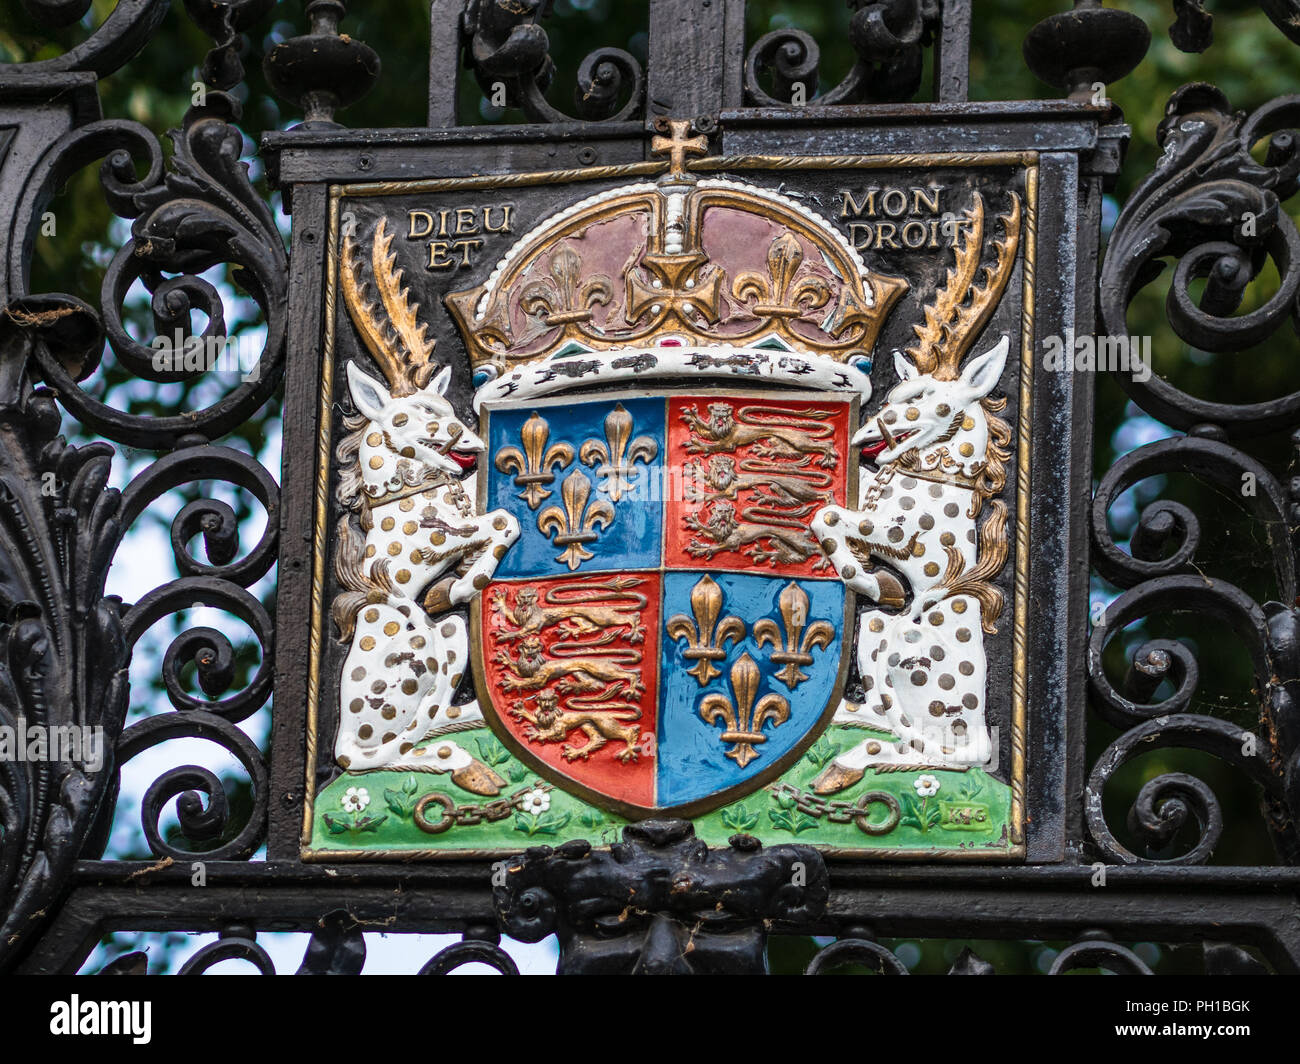 Kings College Cambridge Royal Coat of Arms of King Henry VI, founder of Kings College in 1441 Stock Photo